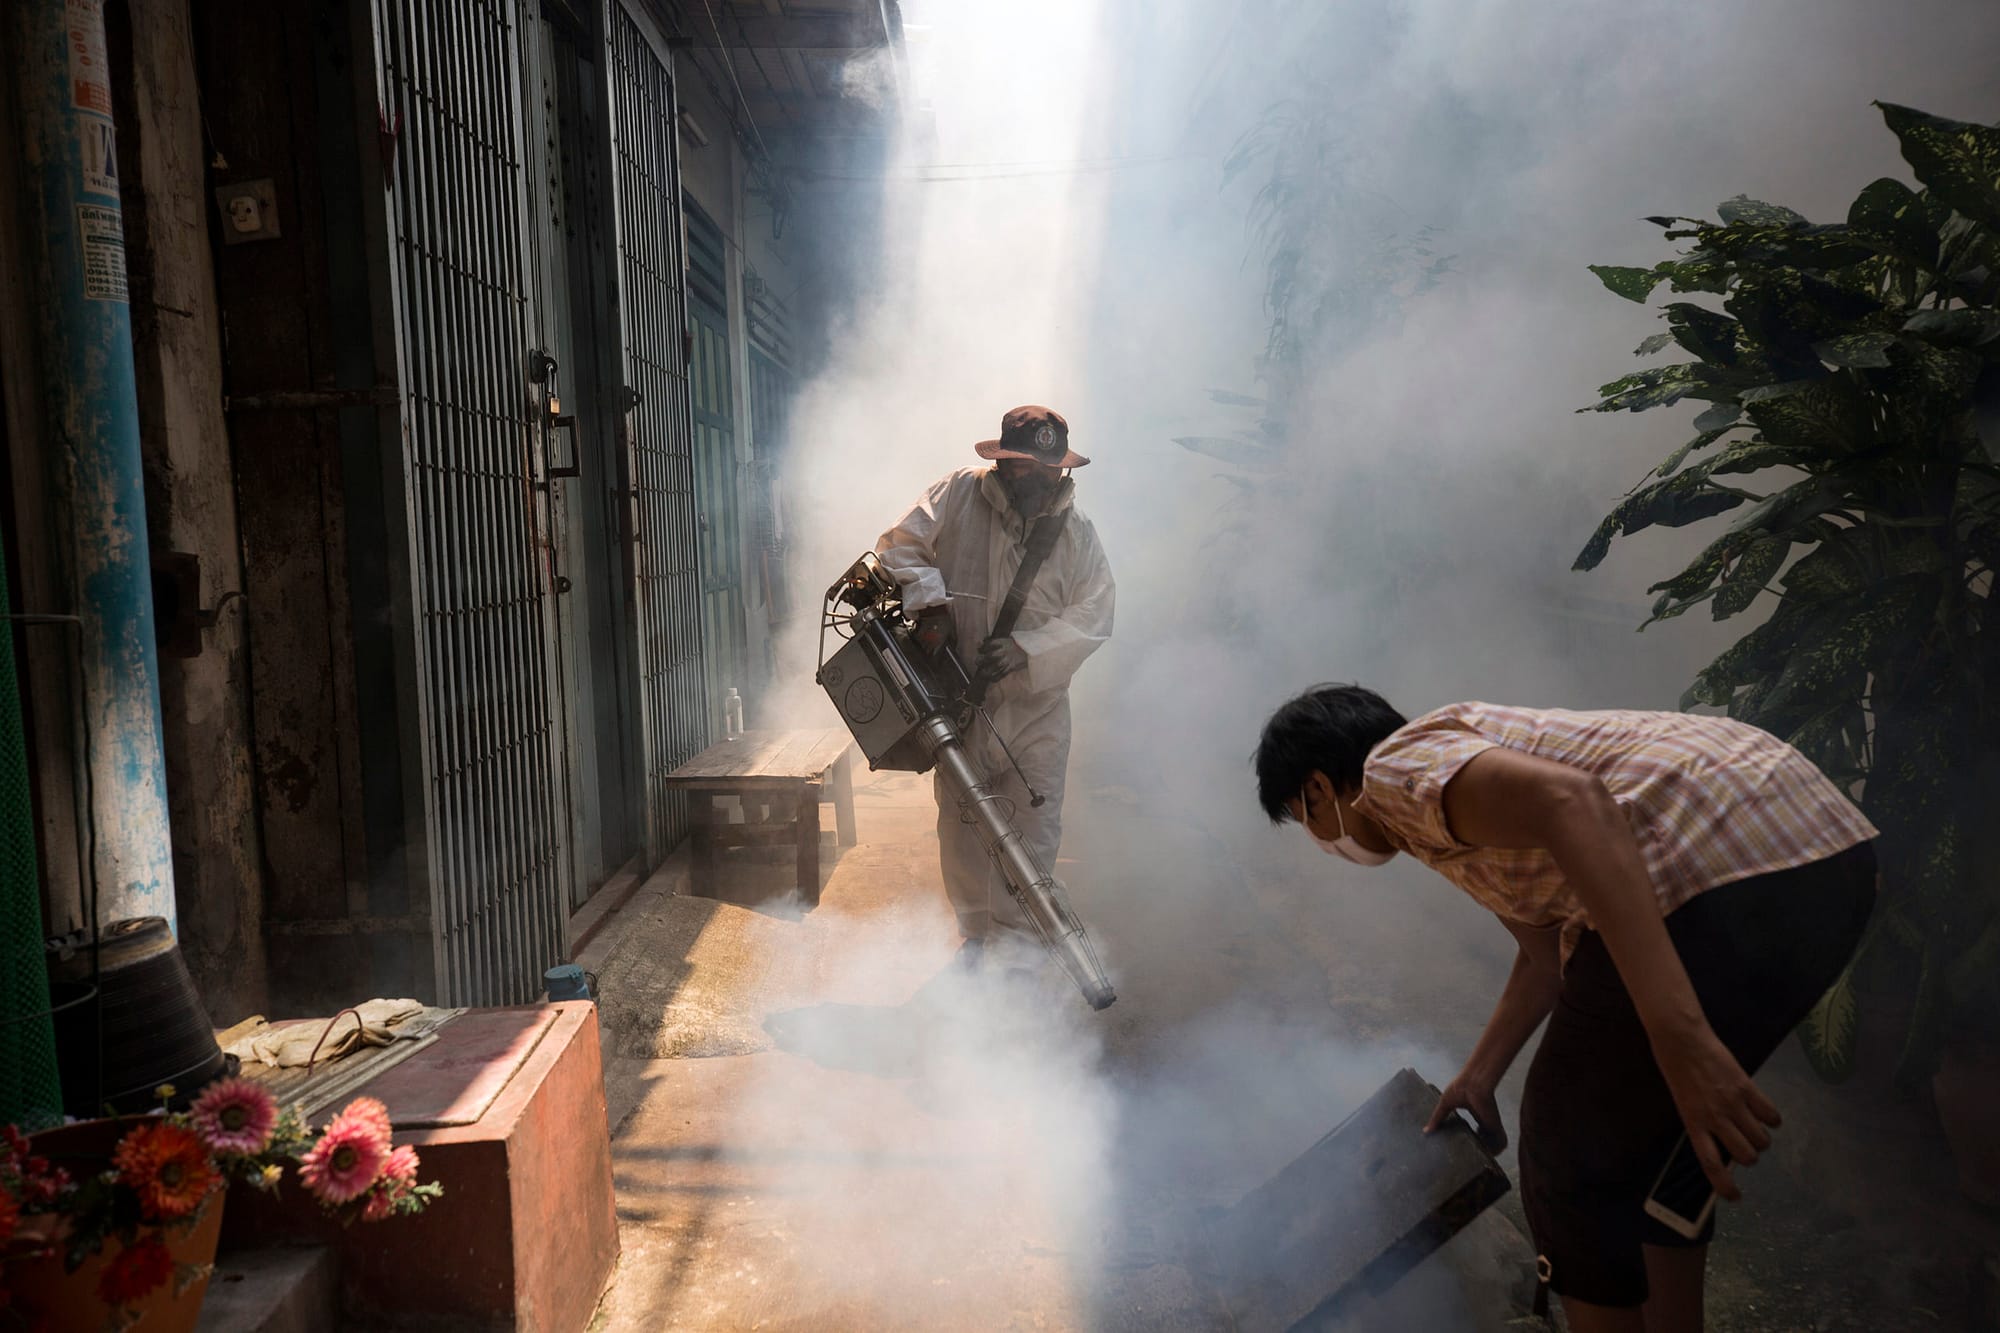 After a serious outbreak of dengue fever in the Chinatown area of Bangkok in which a man died, the Bangkok Metropolitan Administration came in to fumigate the area and advise locals on possible breeding ground of mosquitos.